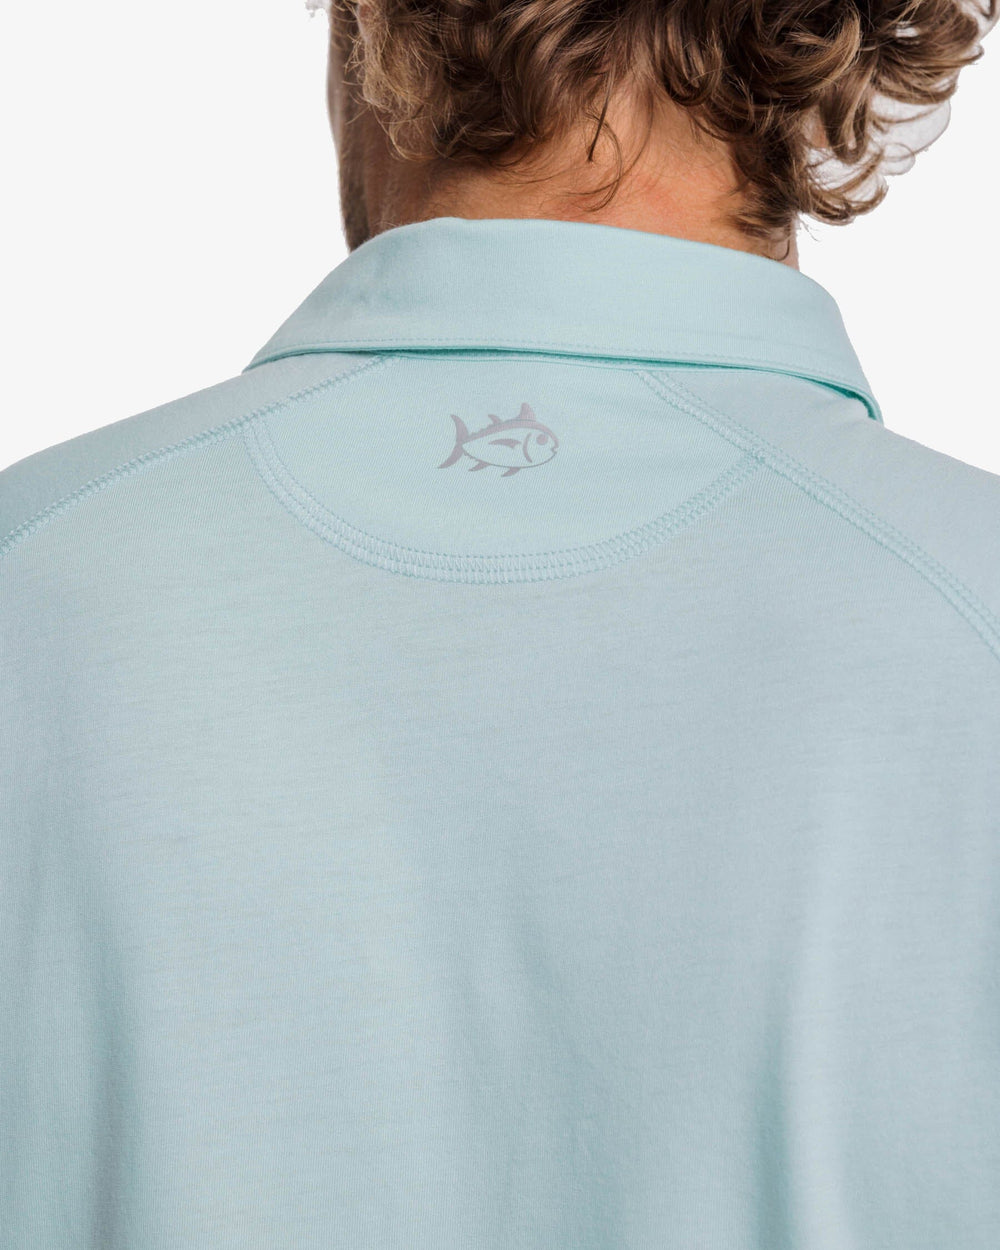 The detail view of the Southern Tide Racquet Polo Shirt by Southern Tide - Baltic Teal